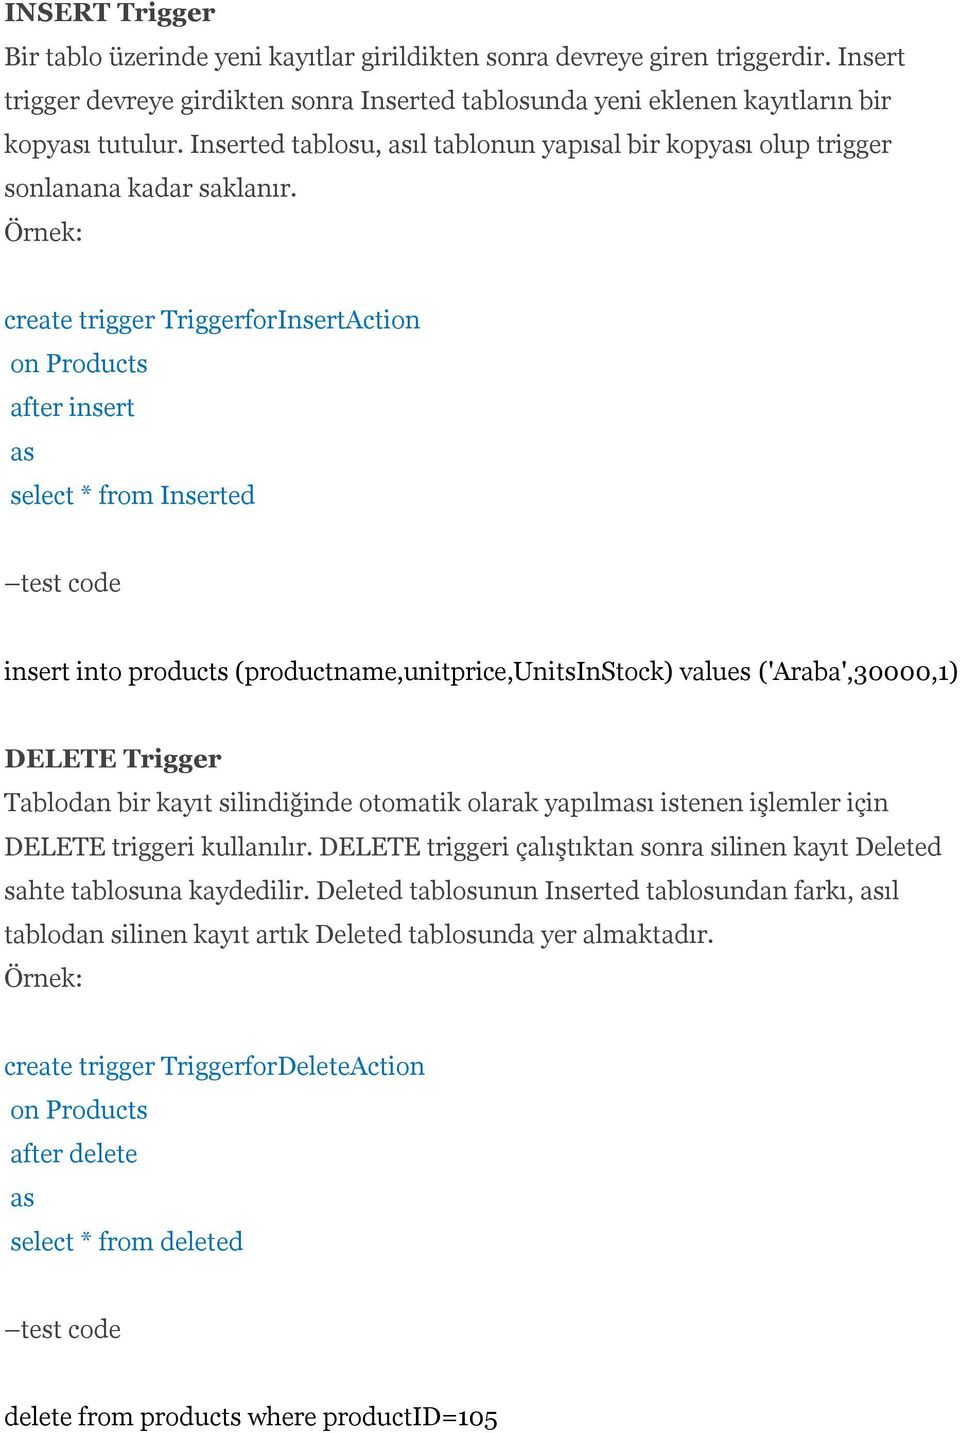 Örnek: create trigger TriggerforInsertAction on Products after insert select * from Inserted test code insert into products (productname,unitprice,unitsinstock) values ('Araba',30000,1) DELETE